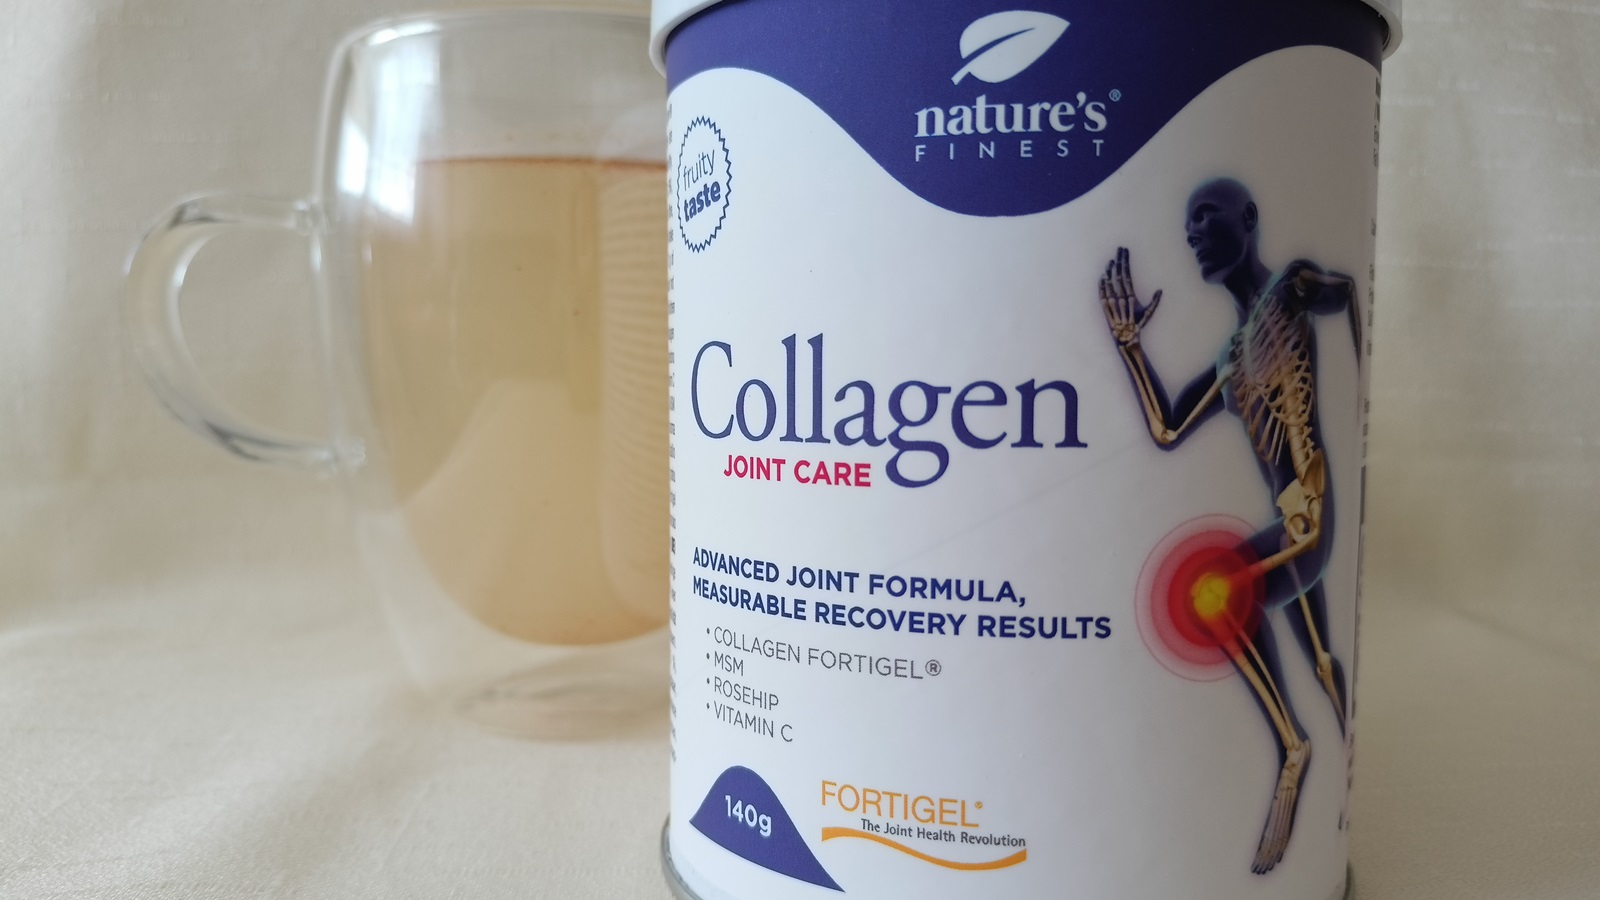 Reseña: Probamos Collagen Joint Care de Nature’s Finest